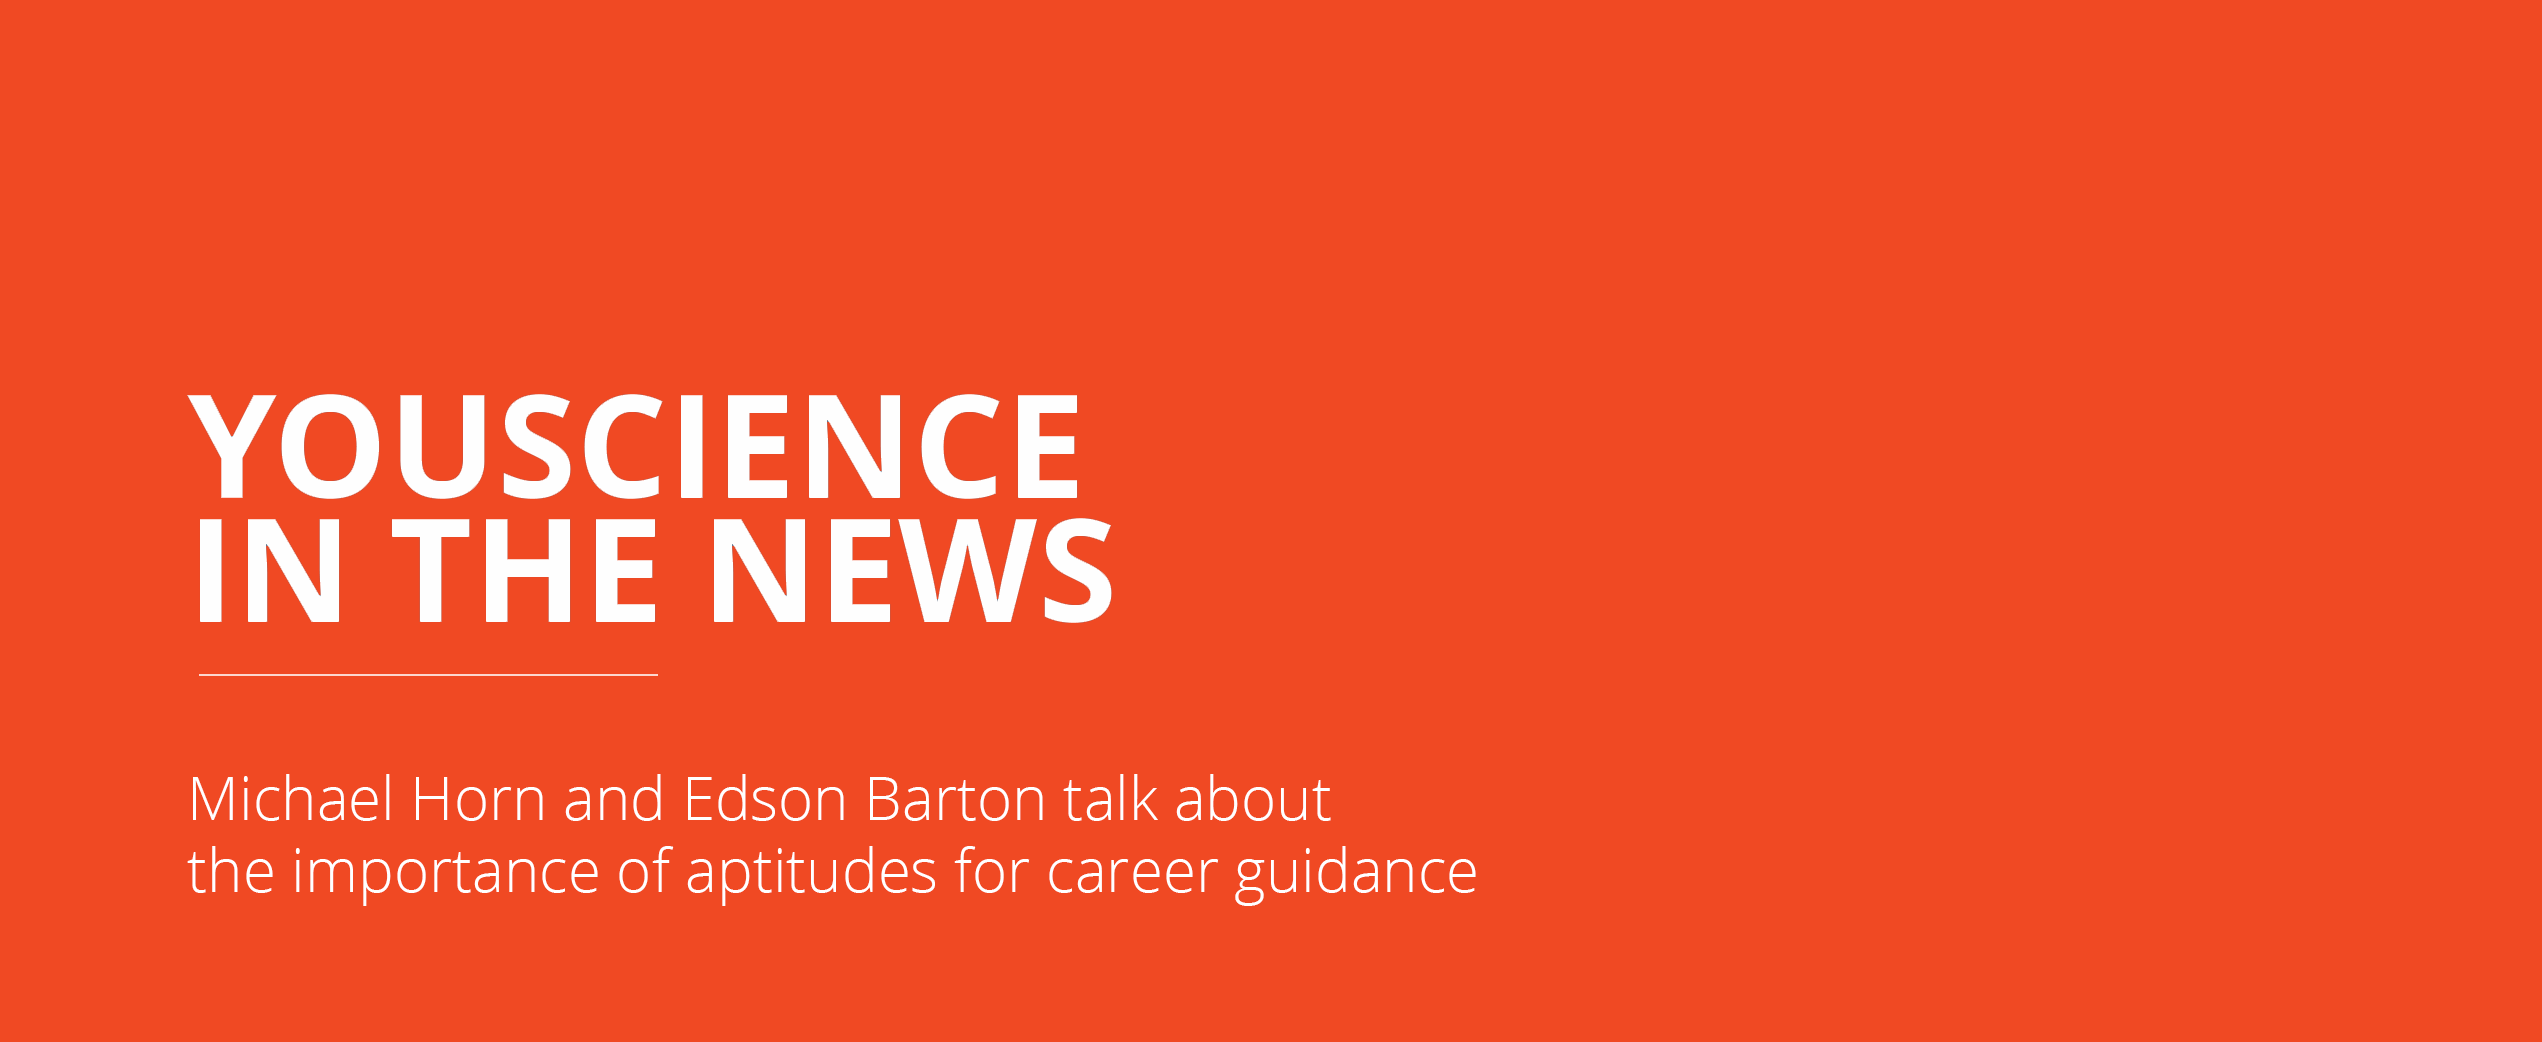 Michael Horn and Edson Barton talk about the importance of aptitudes for career guidance